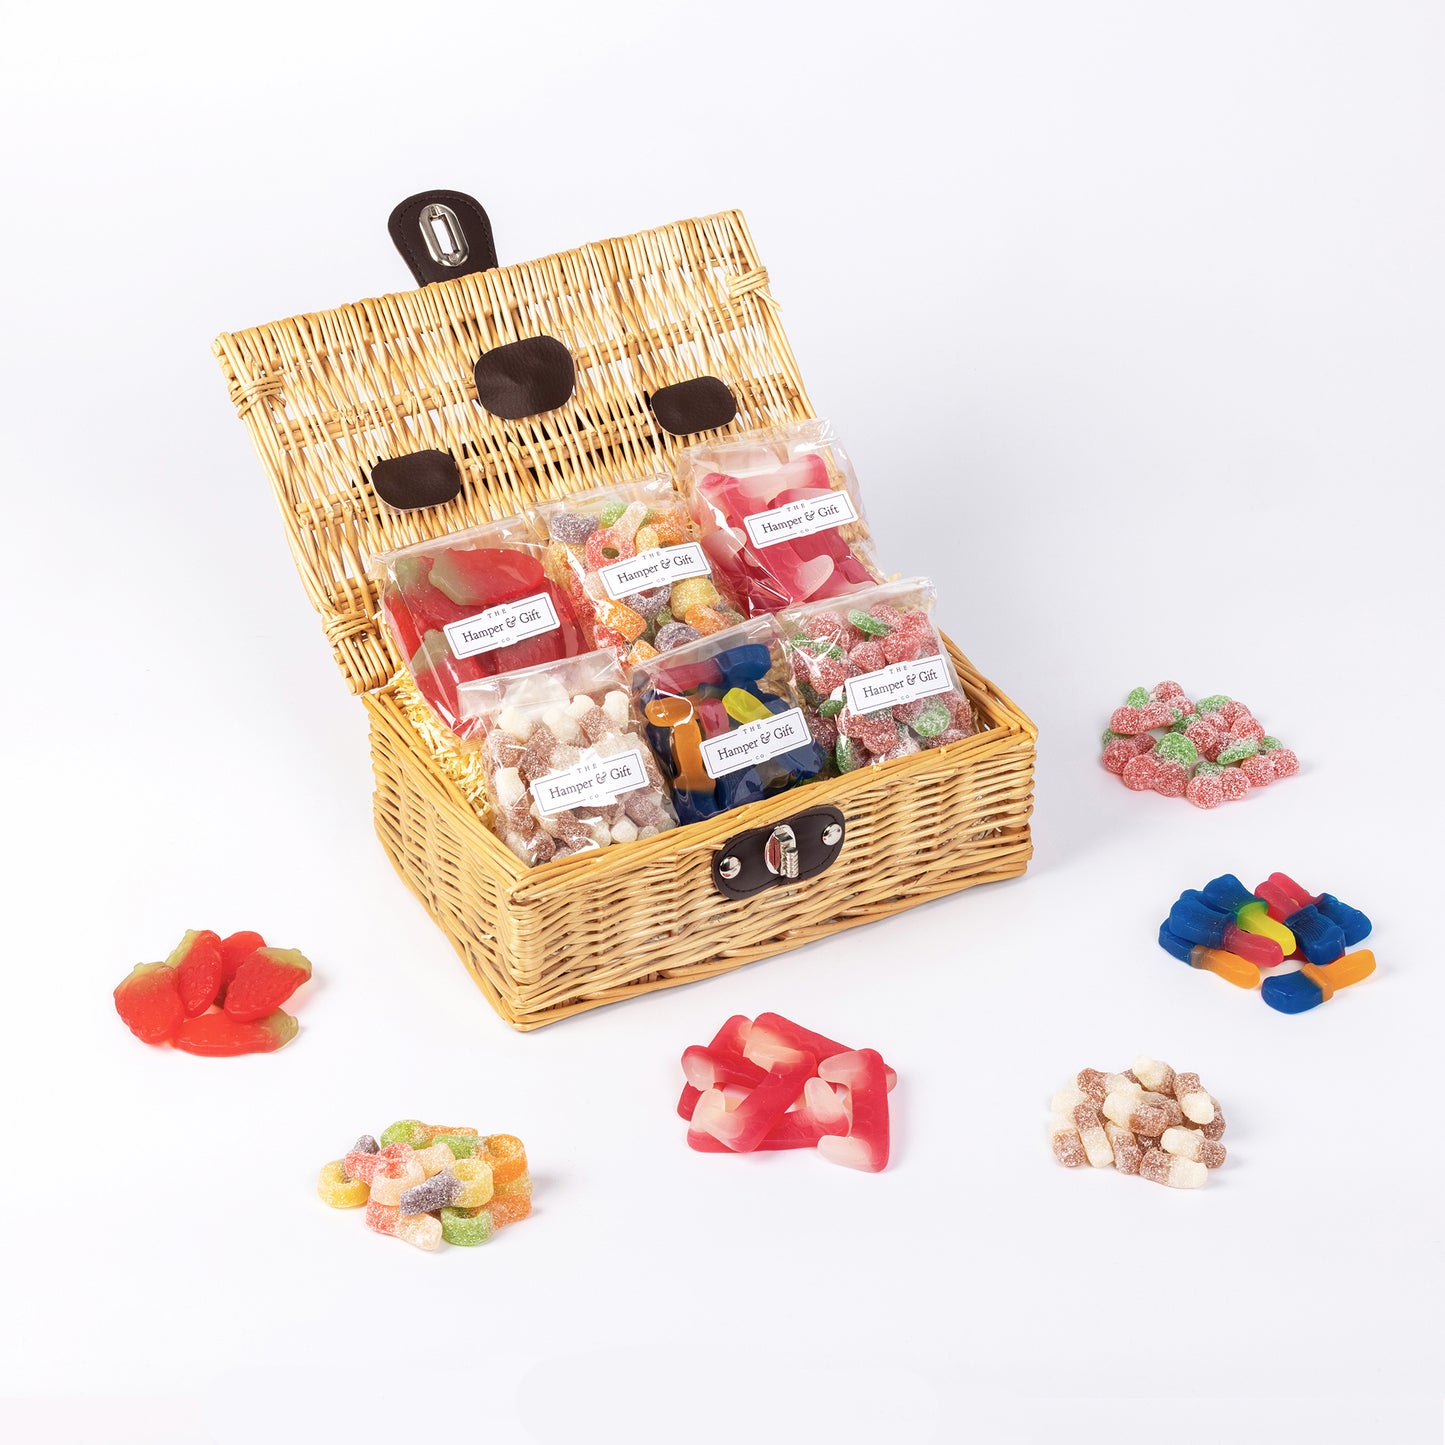 Little Pick & Mix Vegan Sweet Hamper filled with 6 different sweets